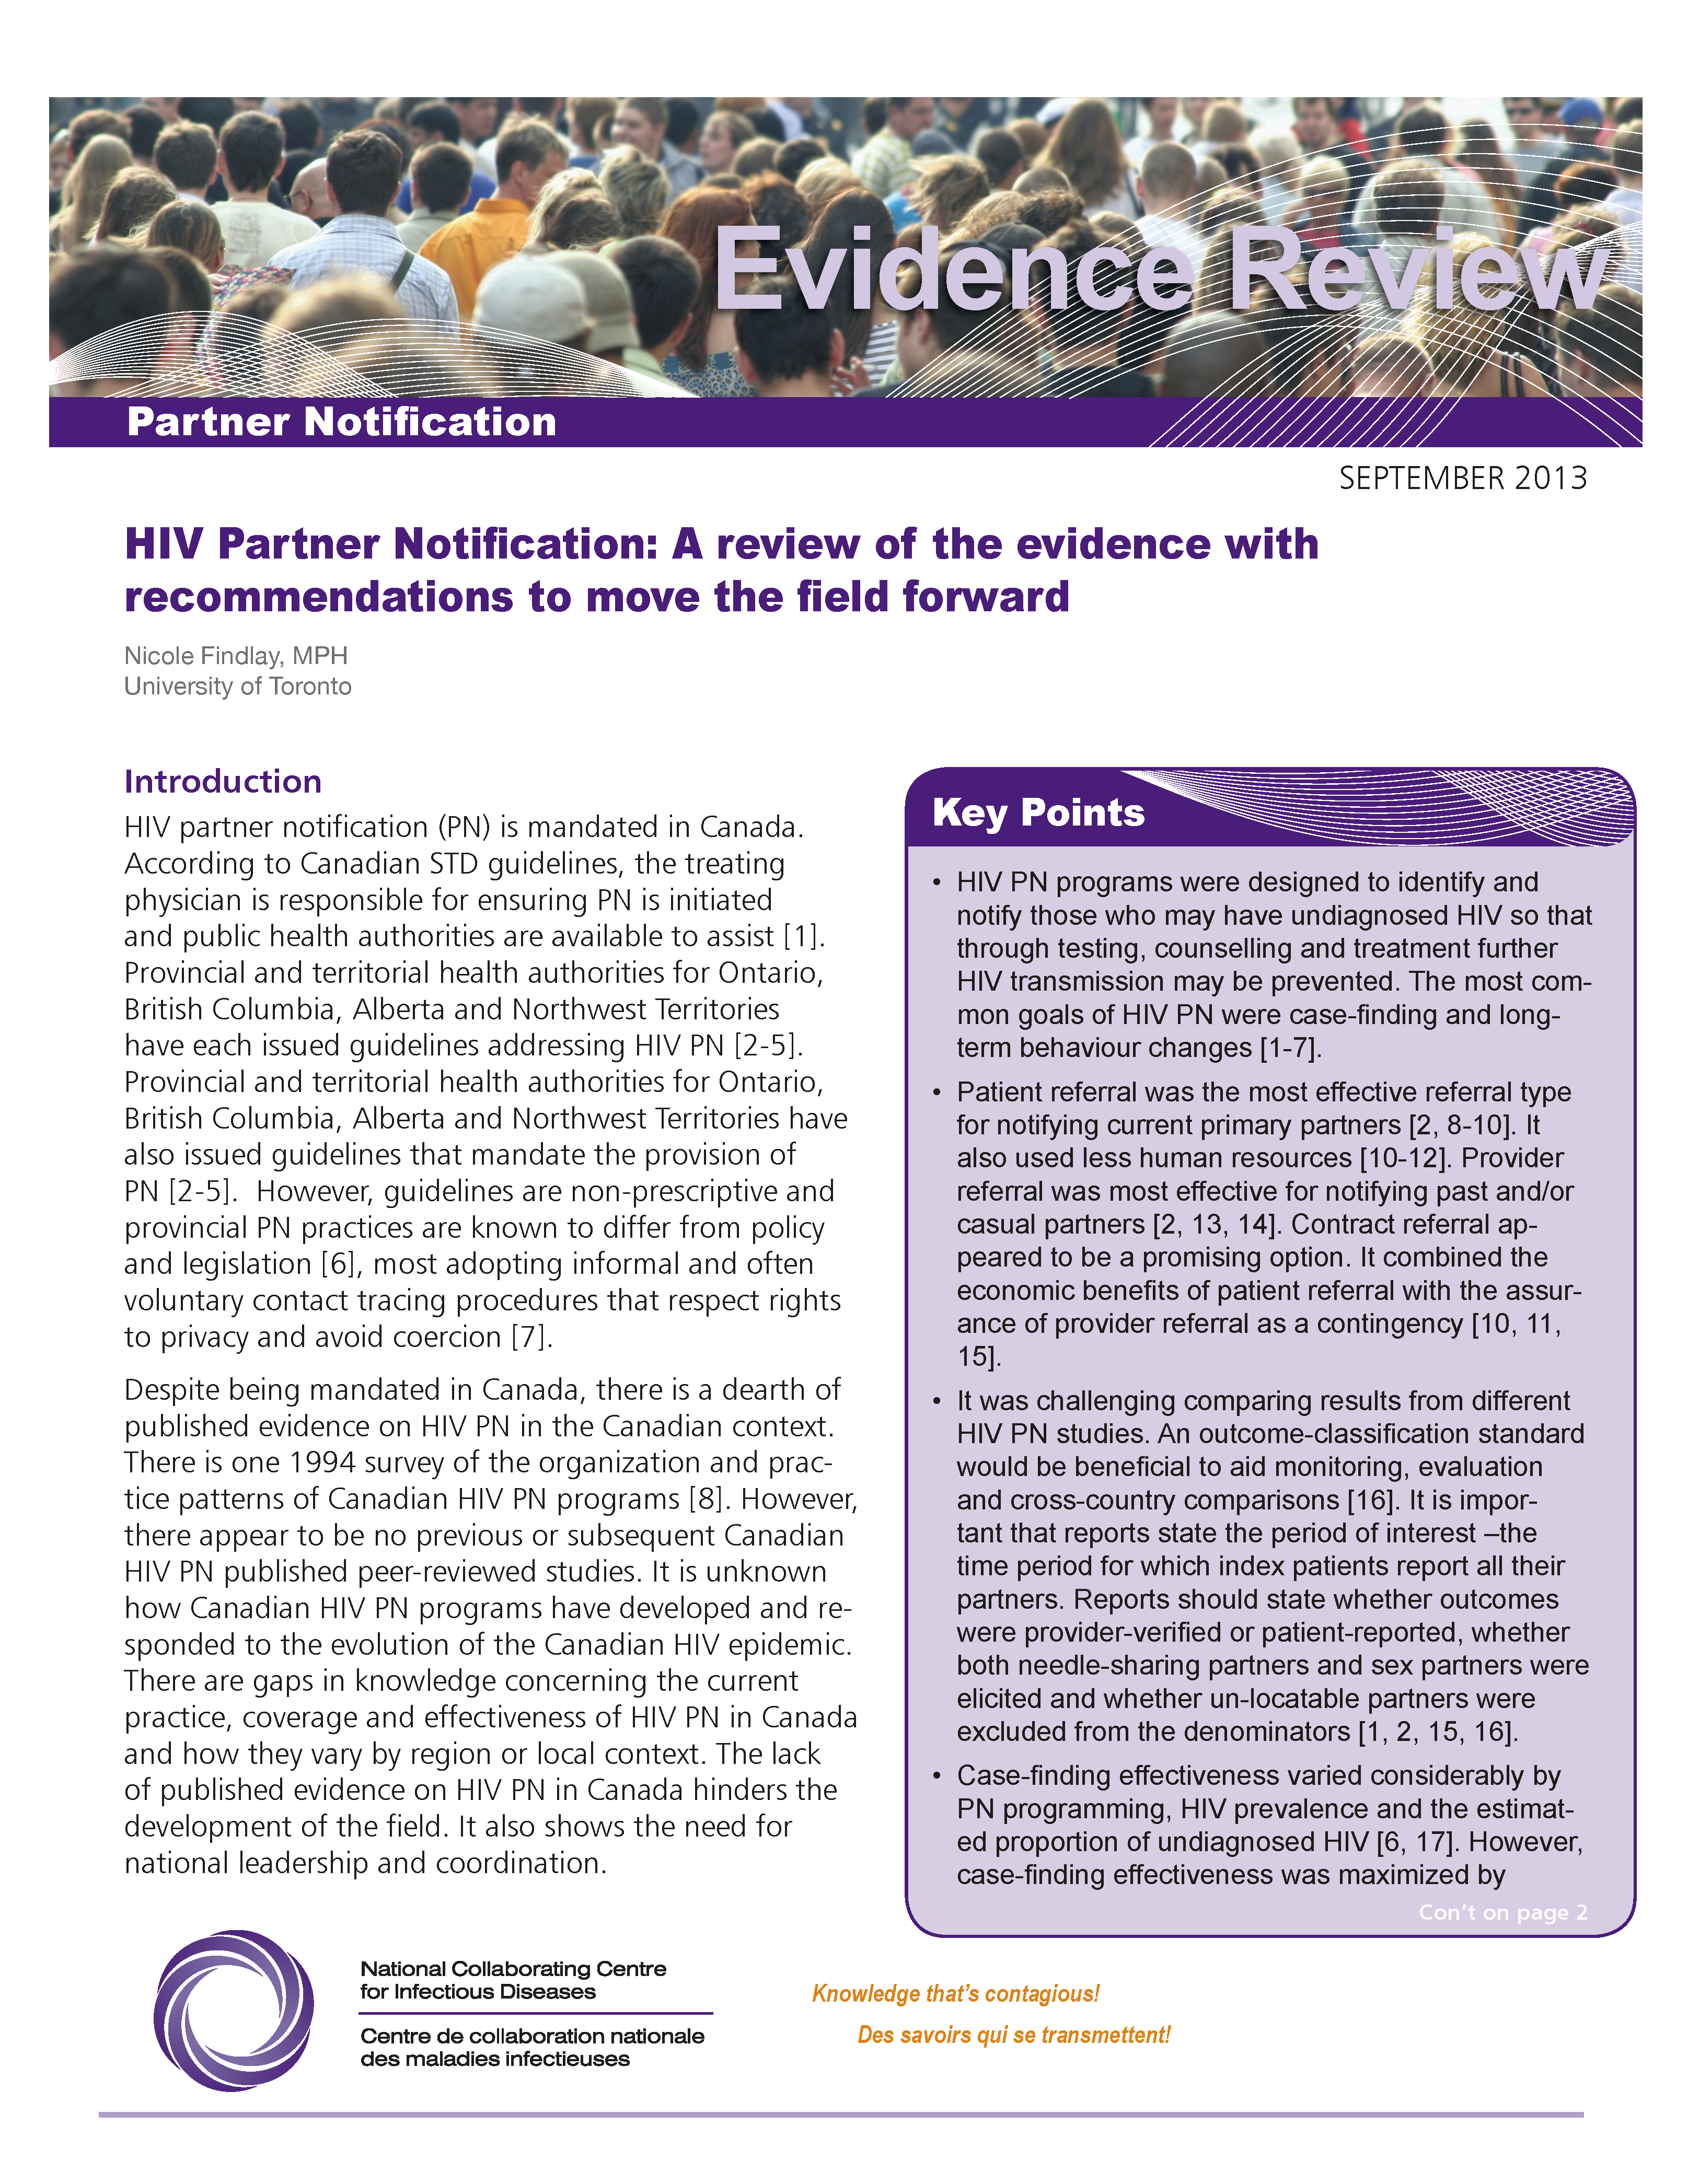 HIV Partner Notification: A review of the evidence with recommendations to move the field forward